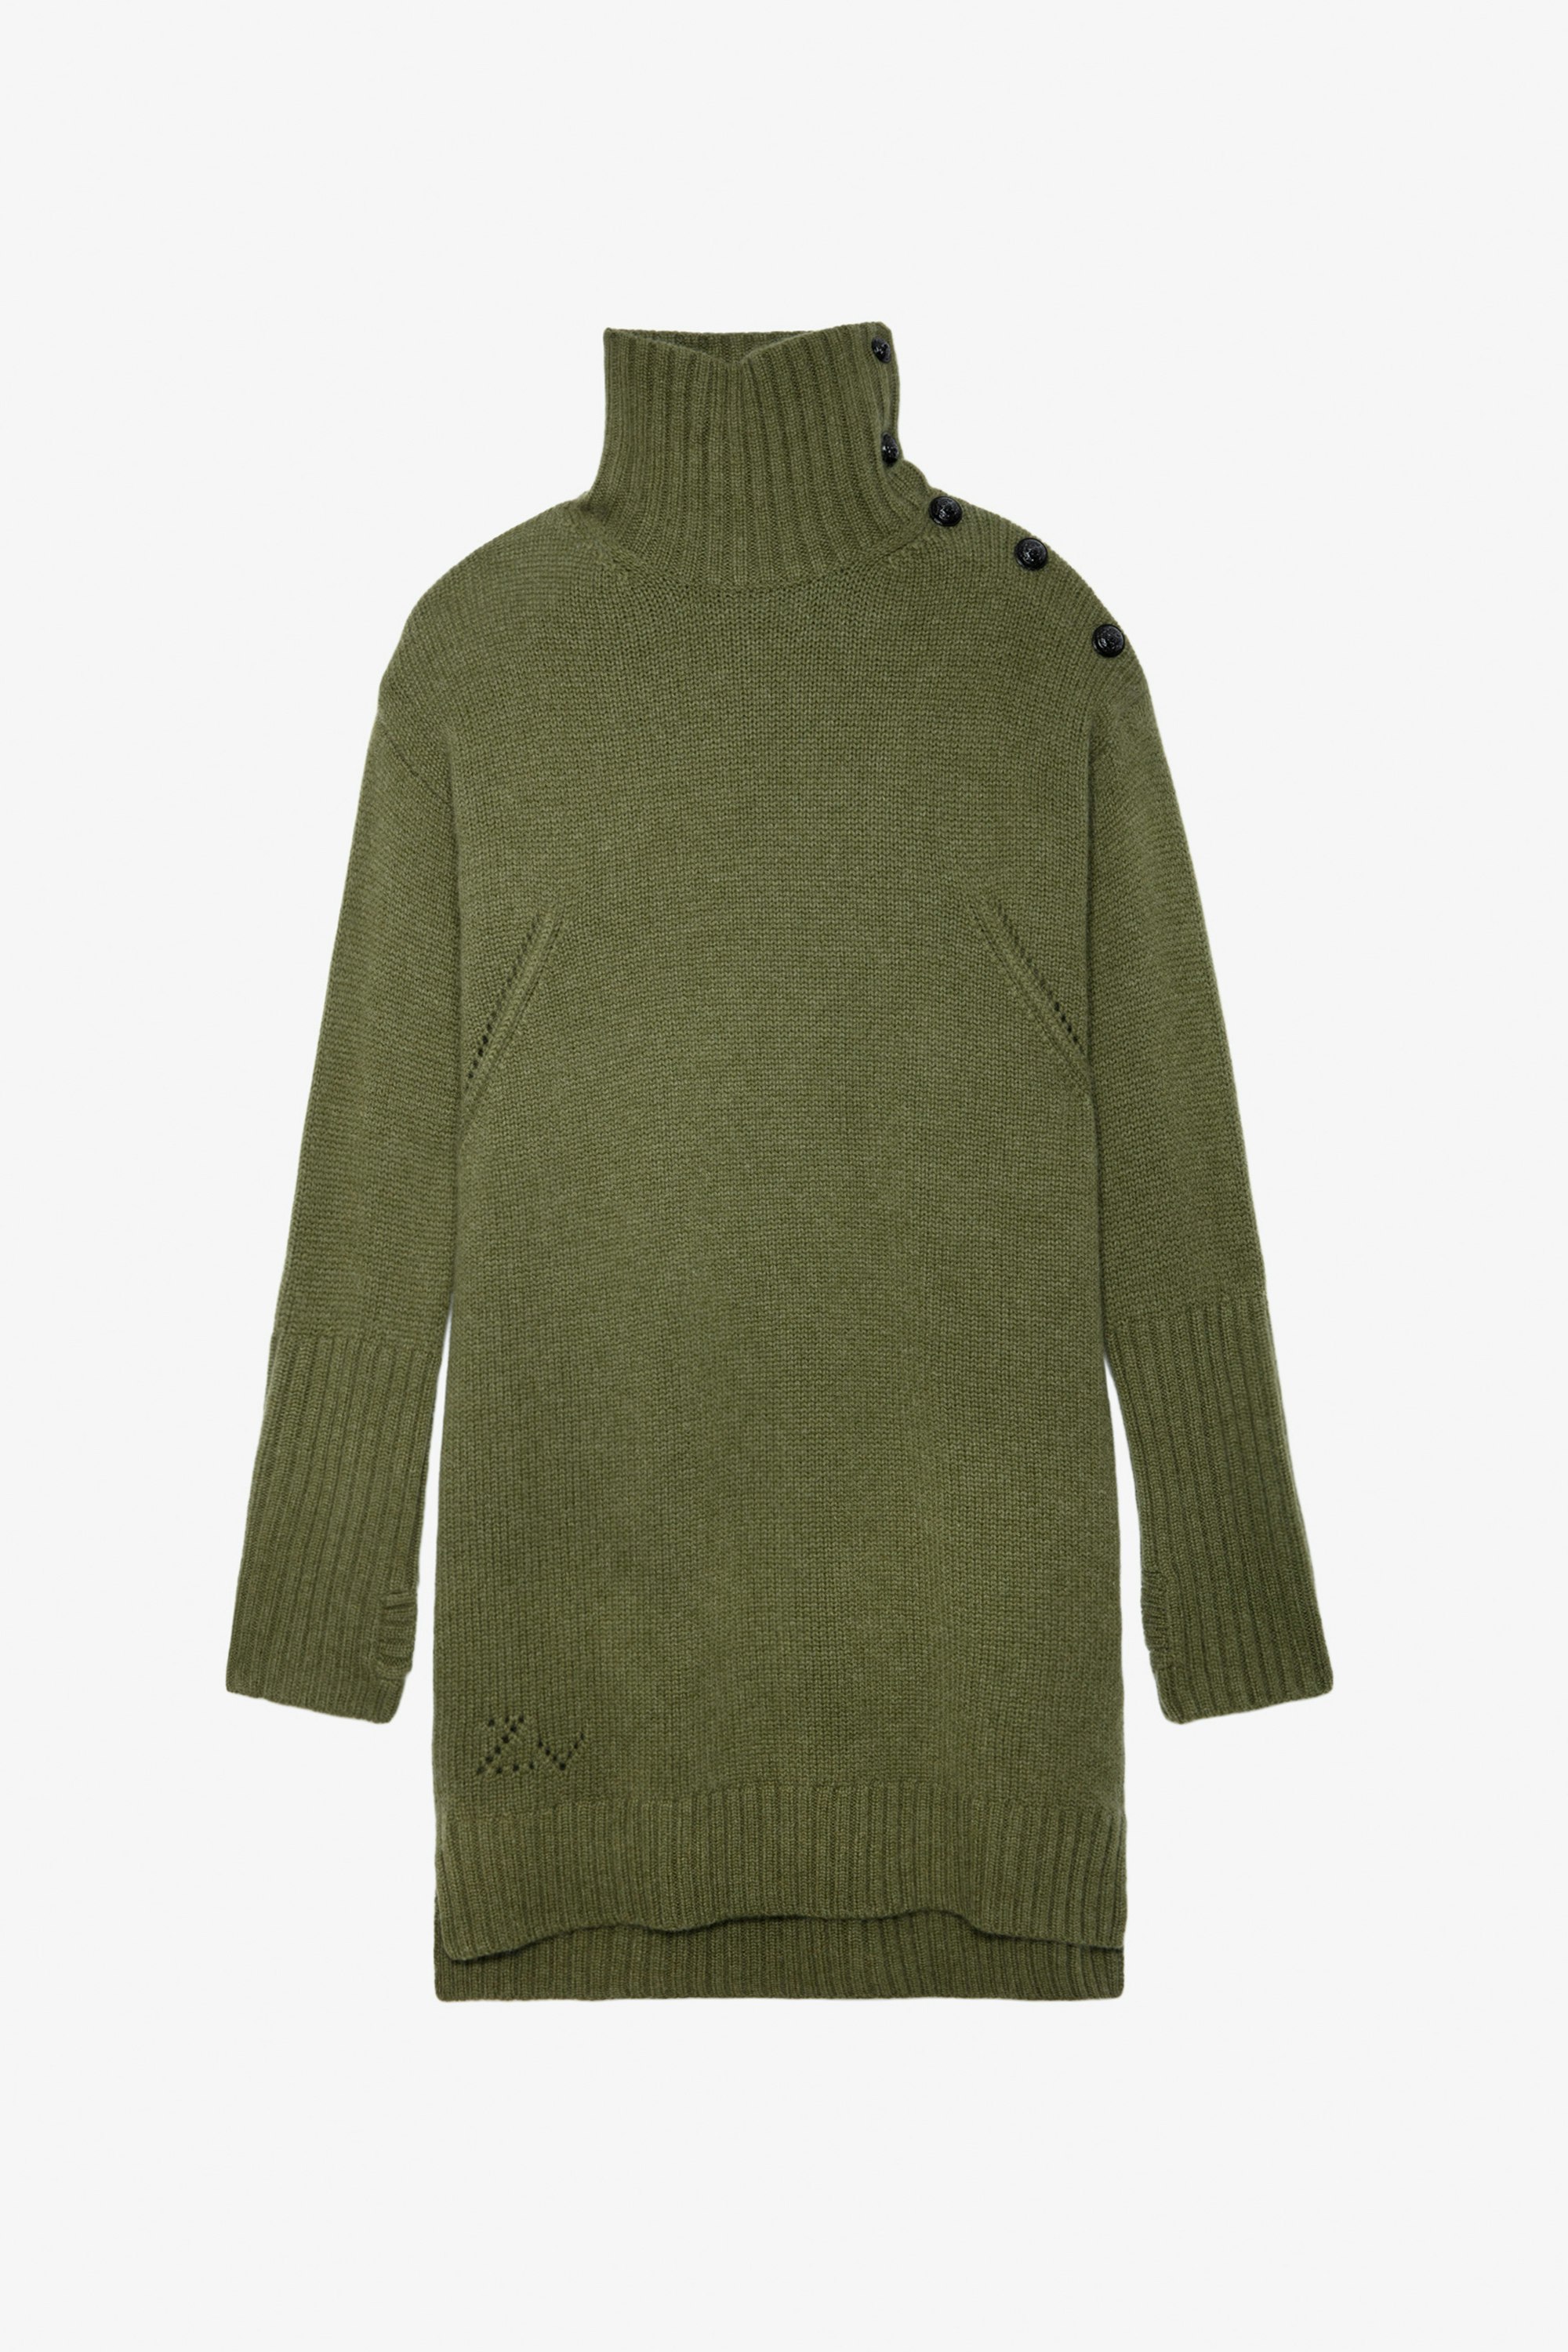 Almira カシミヤ ワンピース - Women’s short khaki cashmere turtleneck dress with buttons on the shoulders and long sleeves.